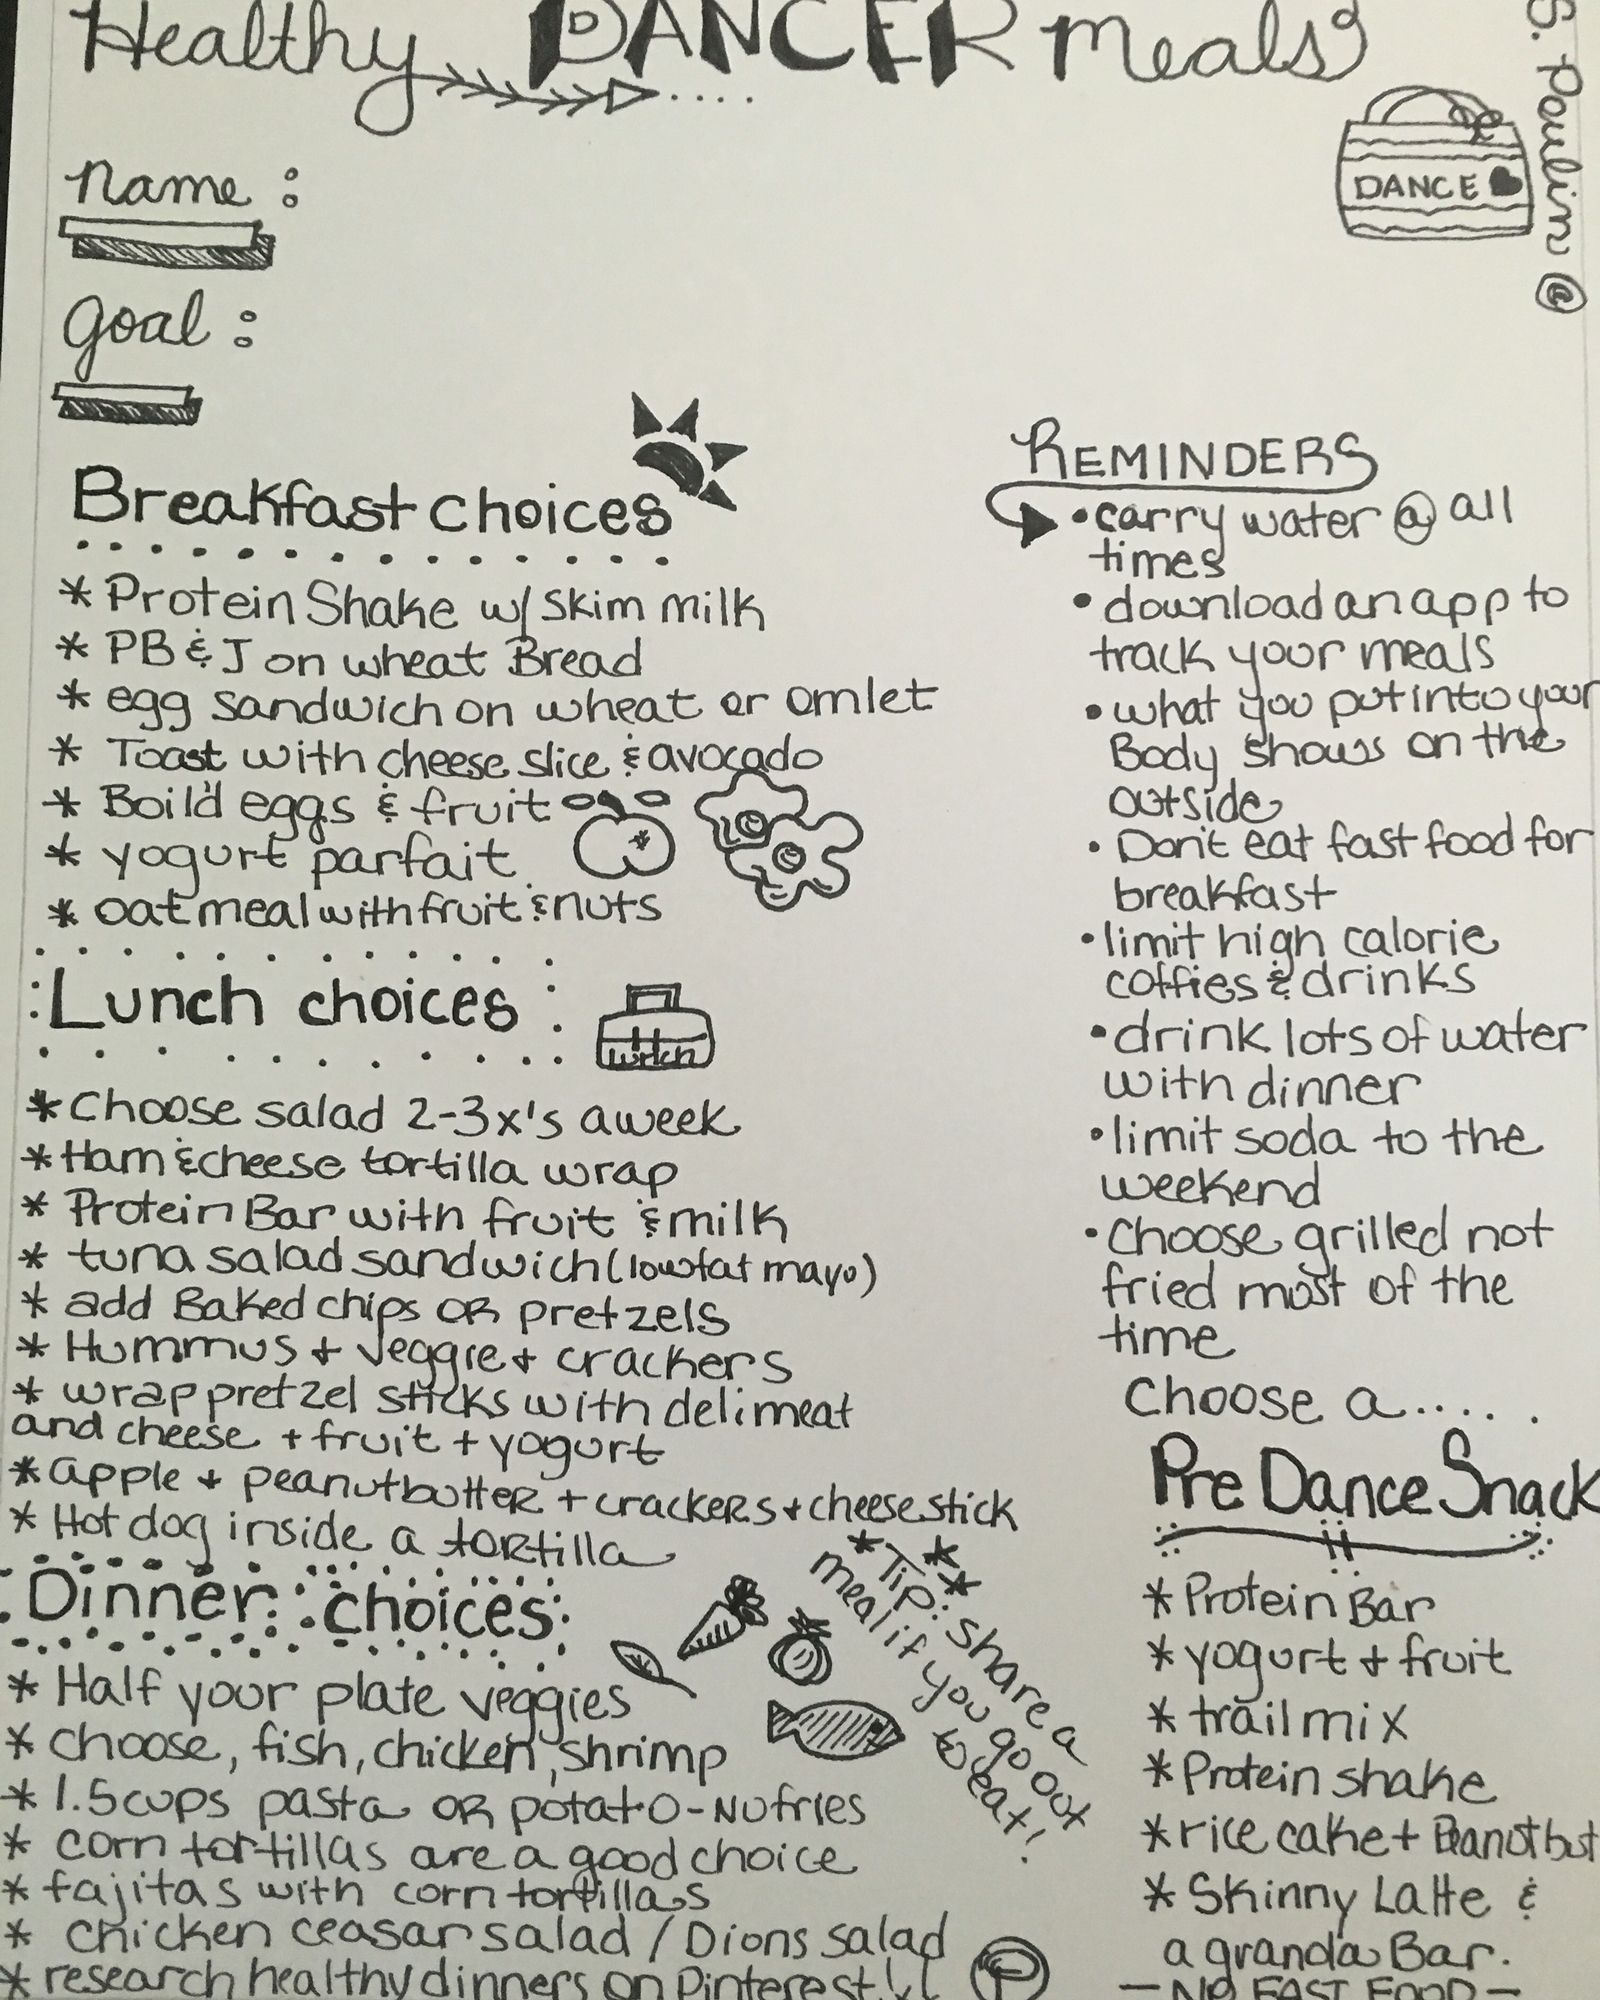 22 diet plans for teens
 ideas